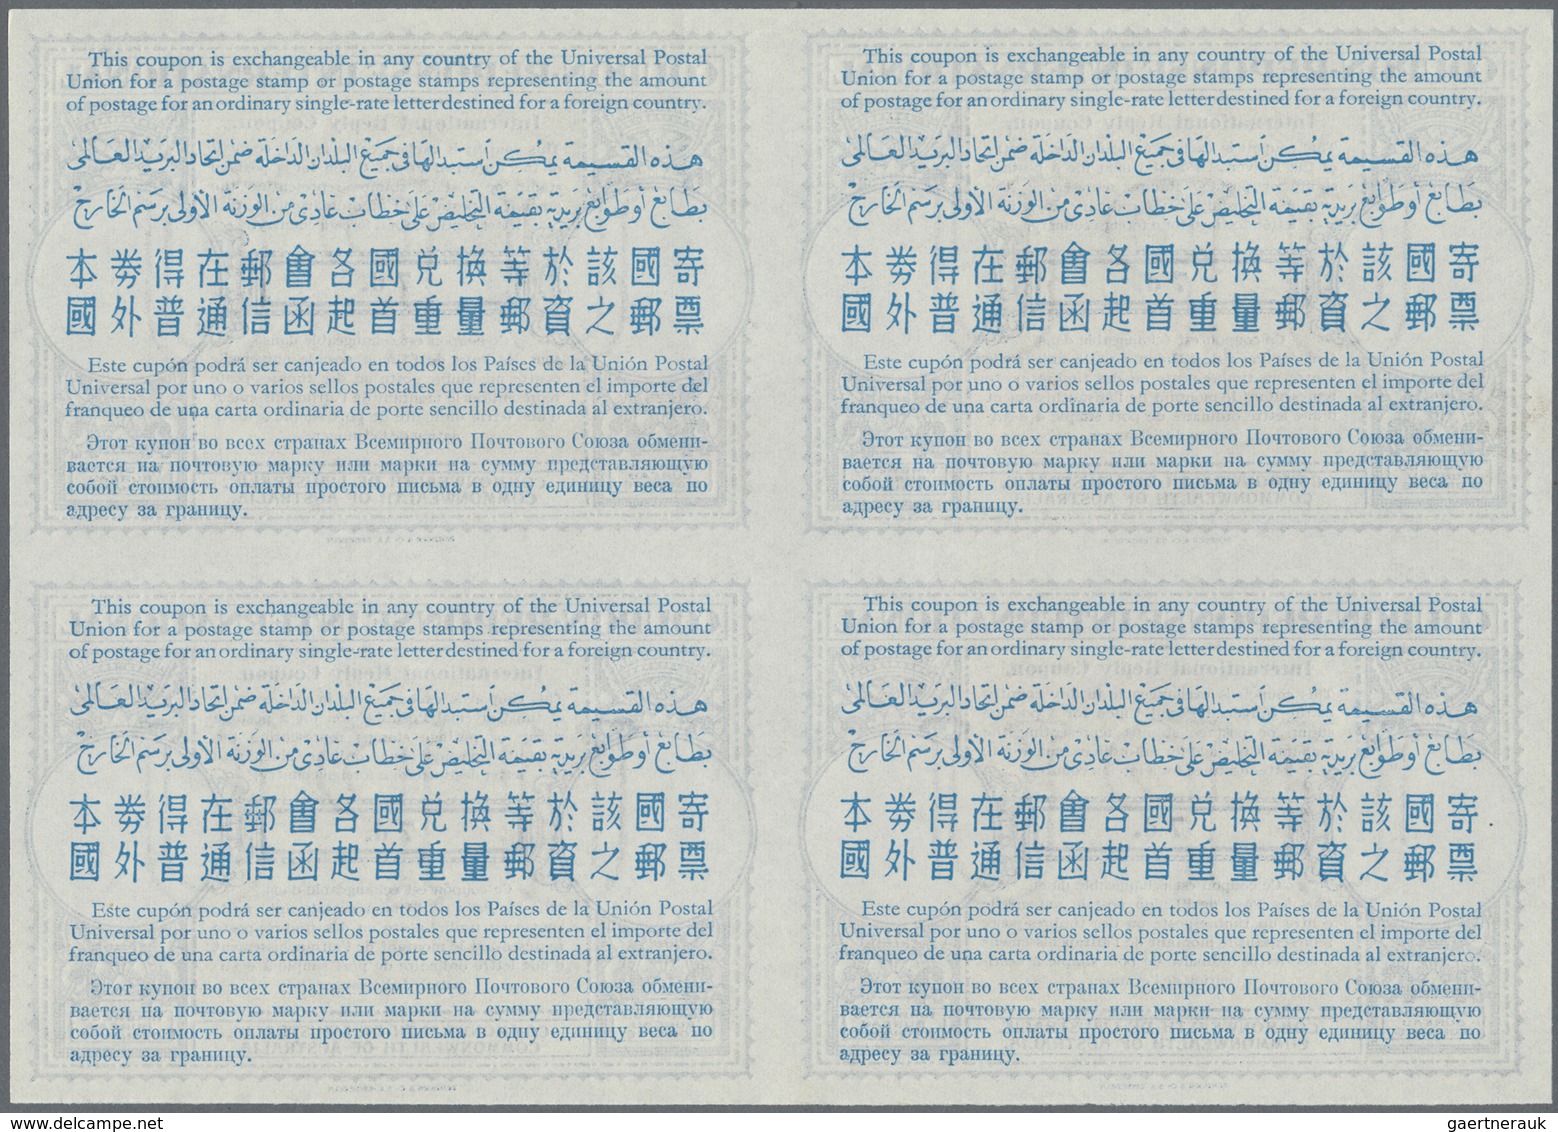 Australien - Ganzsachen: 1948/1953. Lot Of 2 Different Intl. Reply Coupons (London Type) Each In An - Postal Stationery